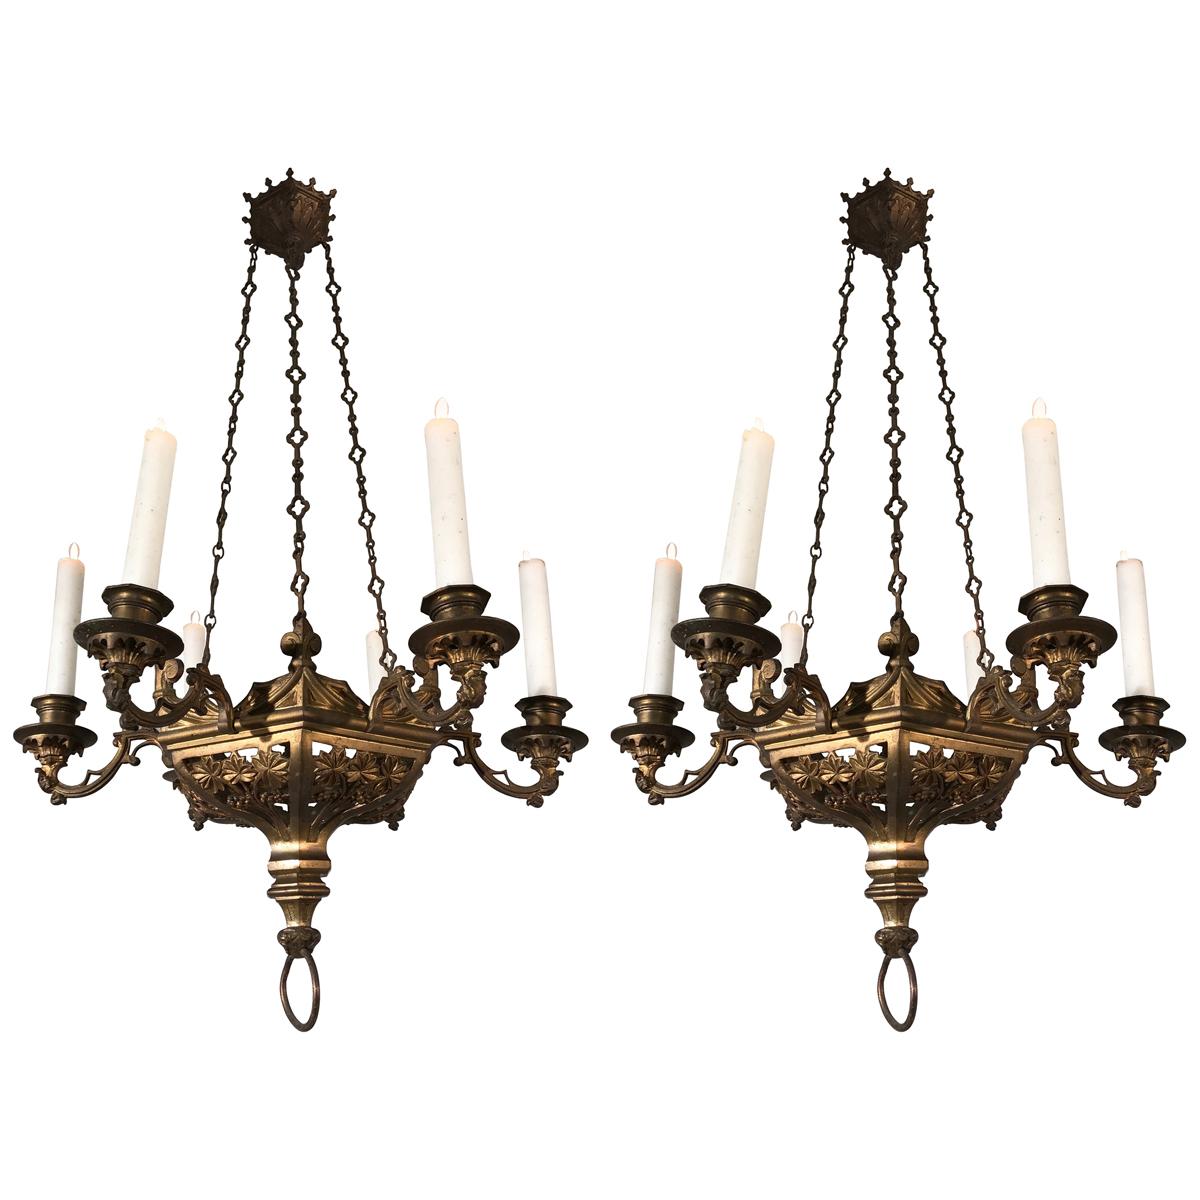 Rare Pair of Late 19th Century, Gilt and Gothic Revival Six Candle Chandeliers